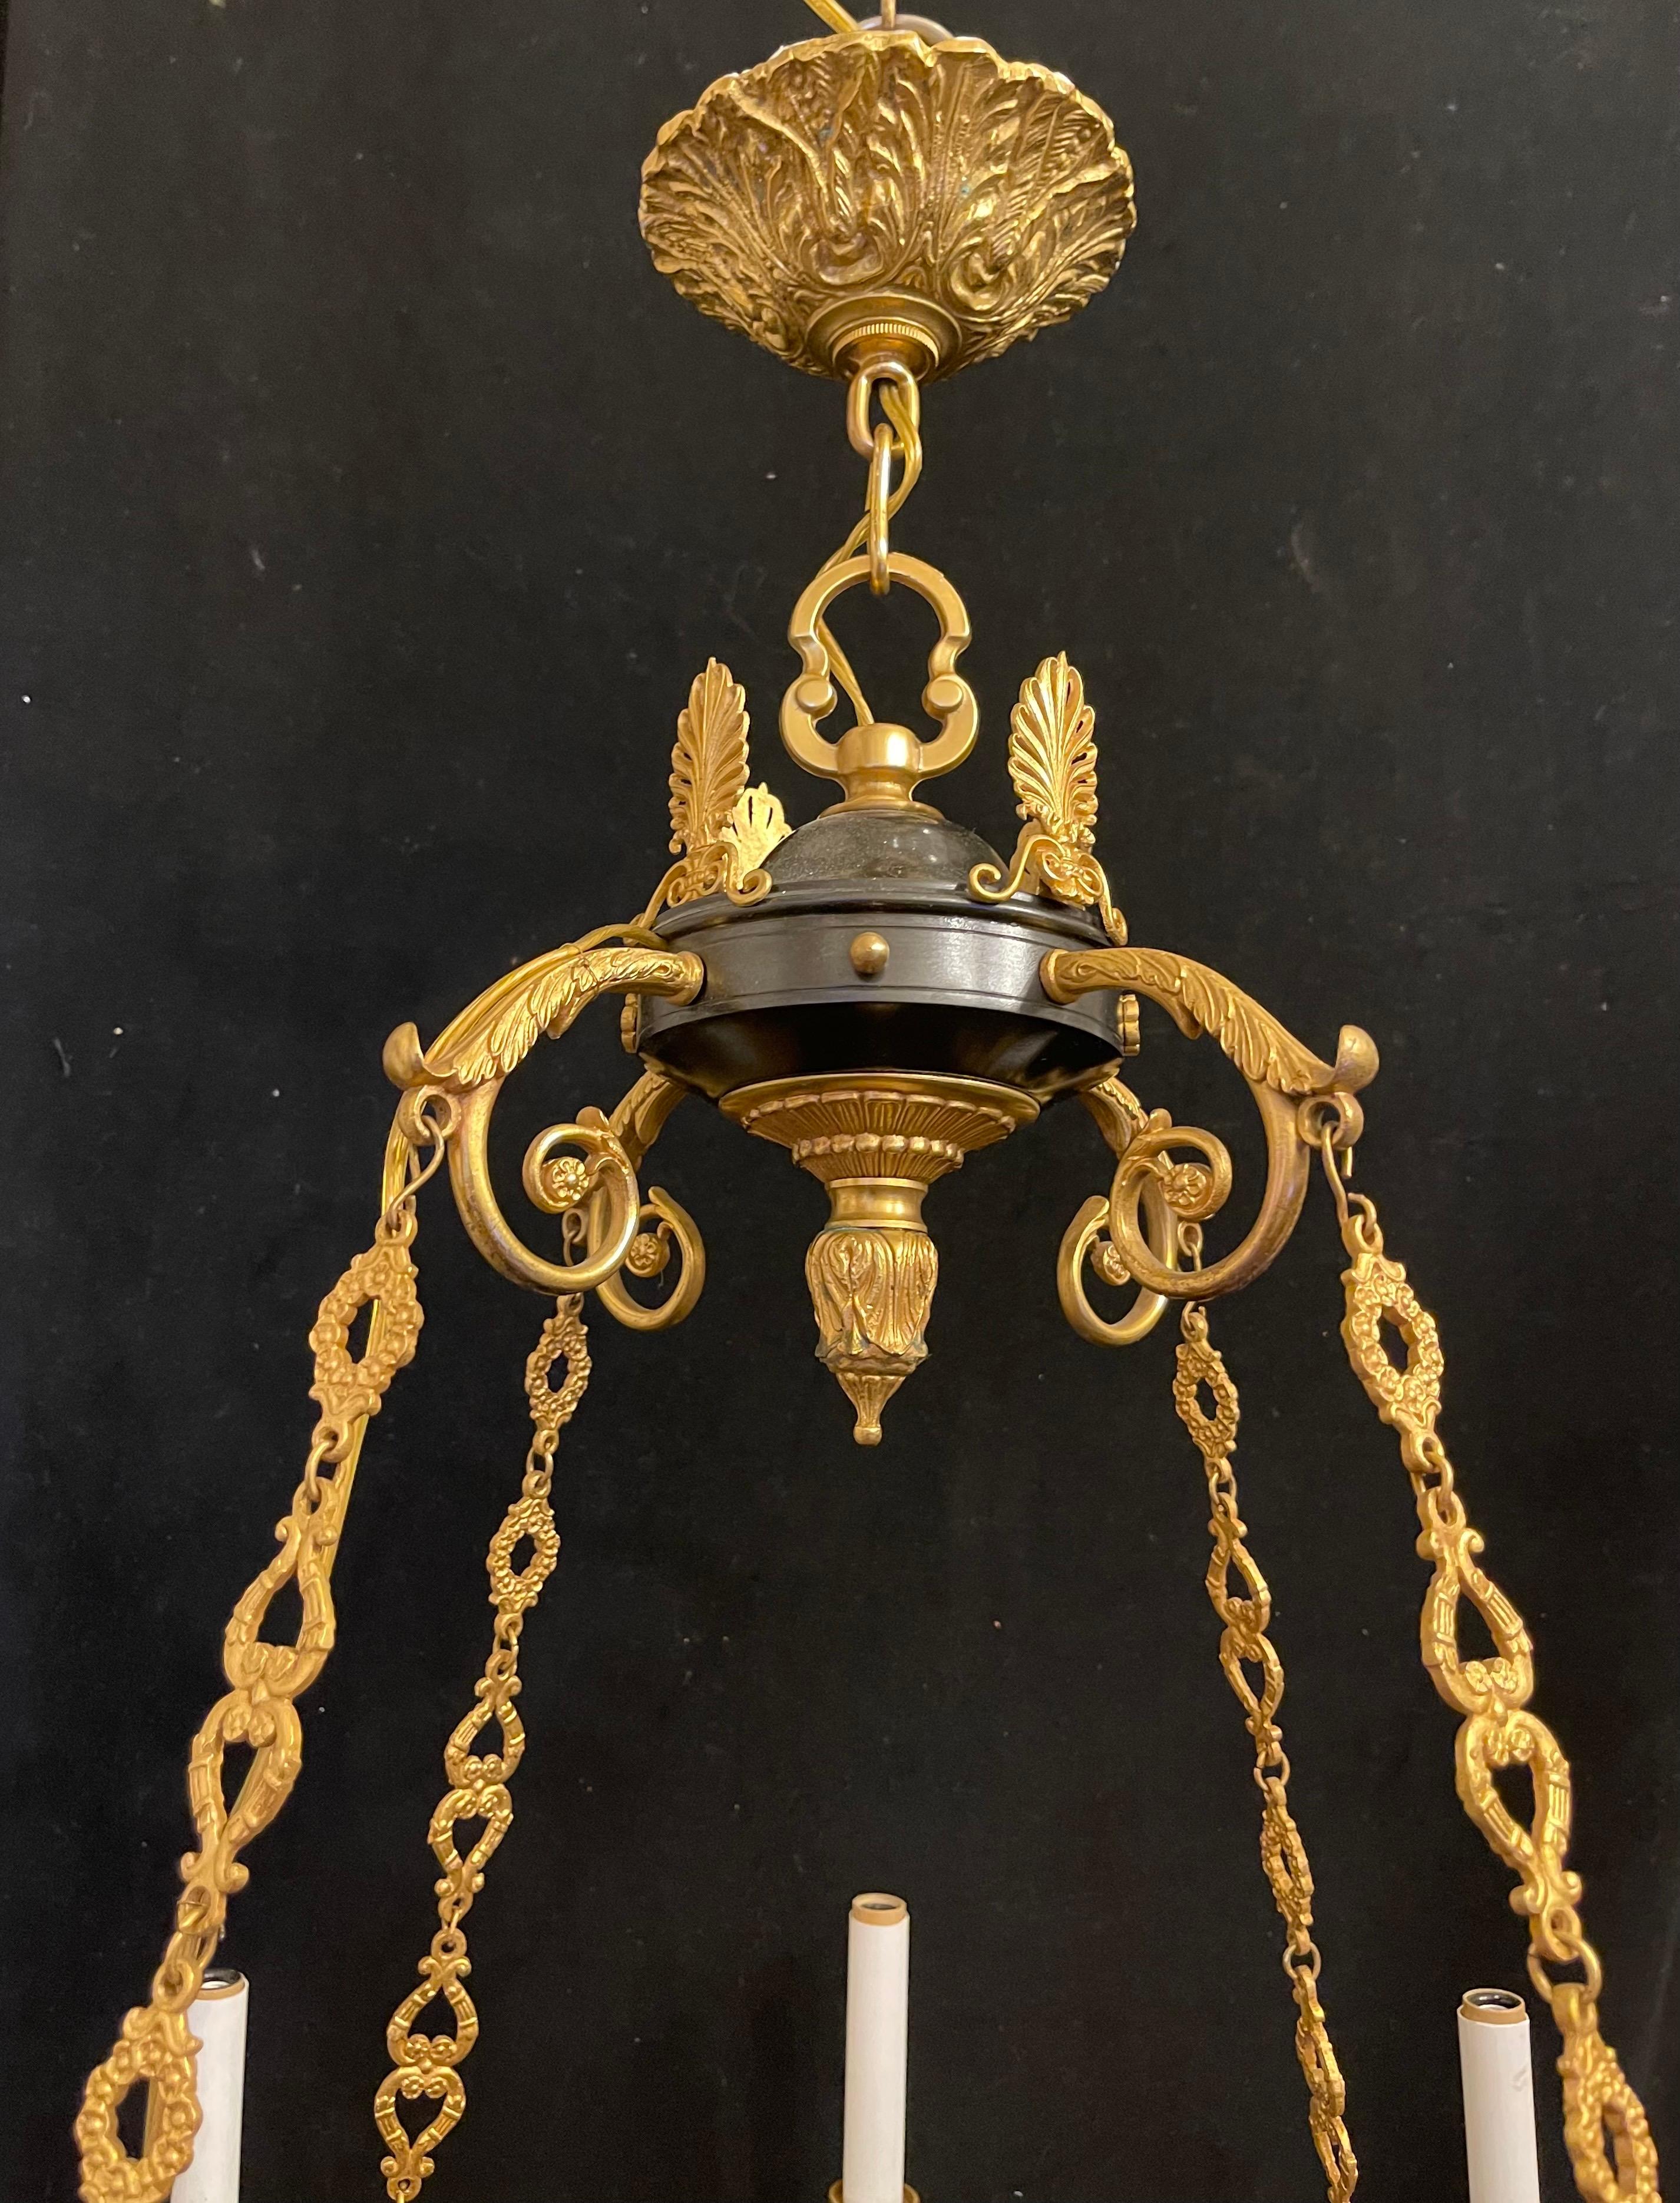 Wonderful French Empire Neoclassical Patinated Ormolu Bronze Chandelier Fixture For Sale 1